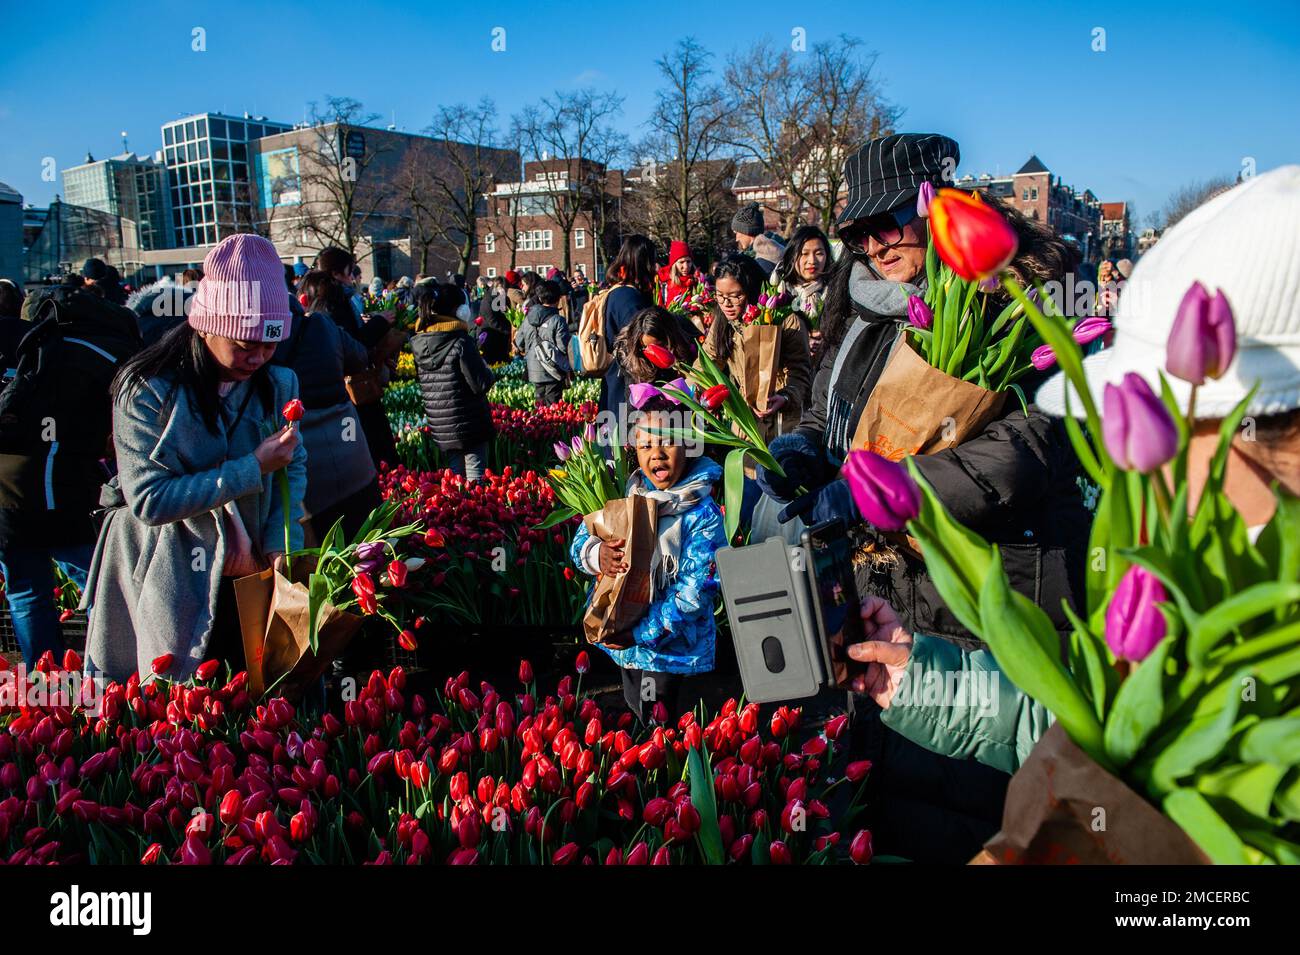 Families are seen choosing tulips for free. Each year on the 3rd Saturday of January, the National Tulip Day is celebrated in Amsterdam. Dutch tulip growers built a huge picking garden with more than 200,000 colorful tulips at the Museumplein in Amsterdam. Visitors are allowed to pick tulips for free. The event was opened by Olympic skating champion, Irene Schouten. Prior to the opening, she christened a new tulip: Tulipa 'Dutch Pearl' as a reference to the world - famous painting 'The girl with a pearl earring' by Johannes Vermeer. Stock Photo